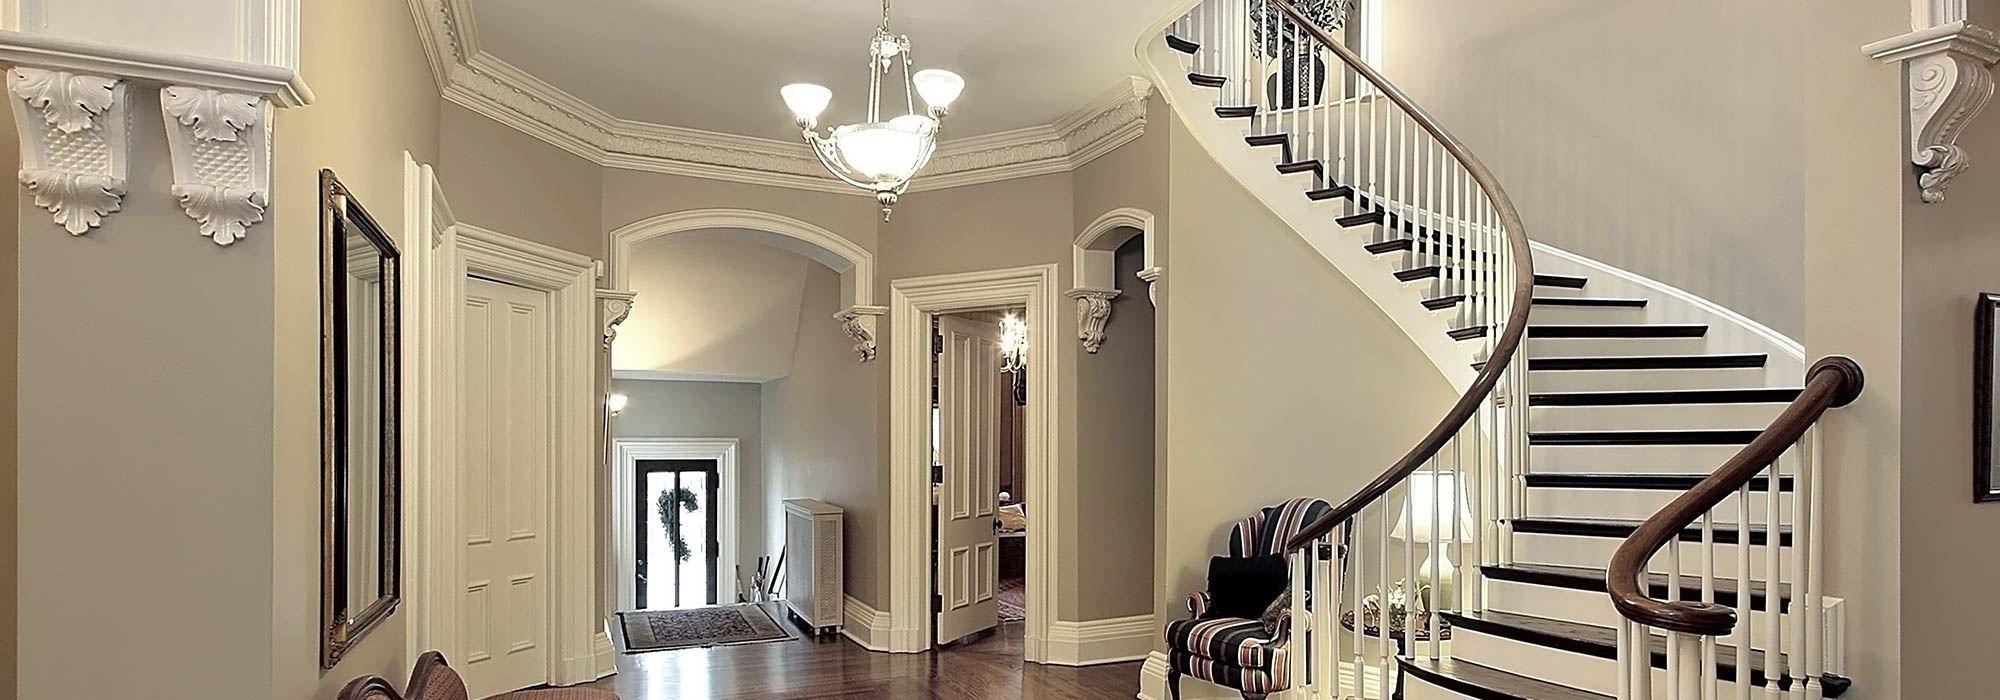 Ceiling Molding by Staircase